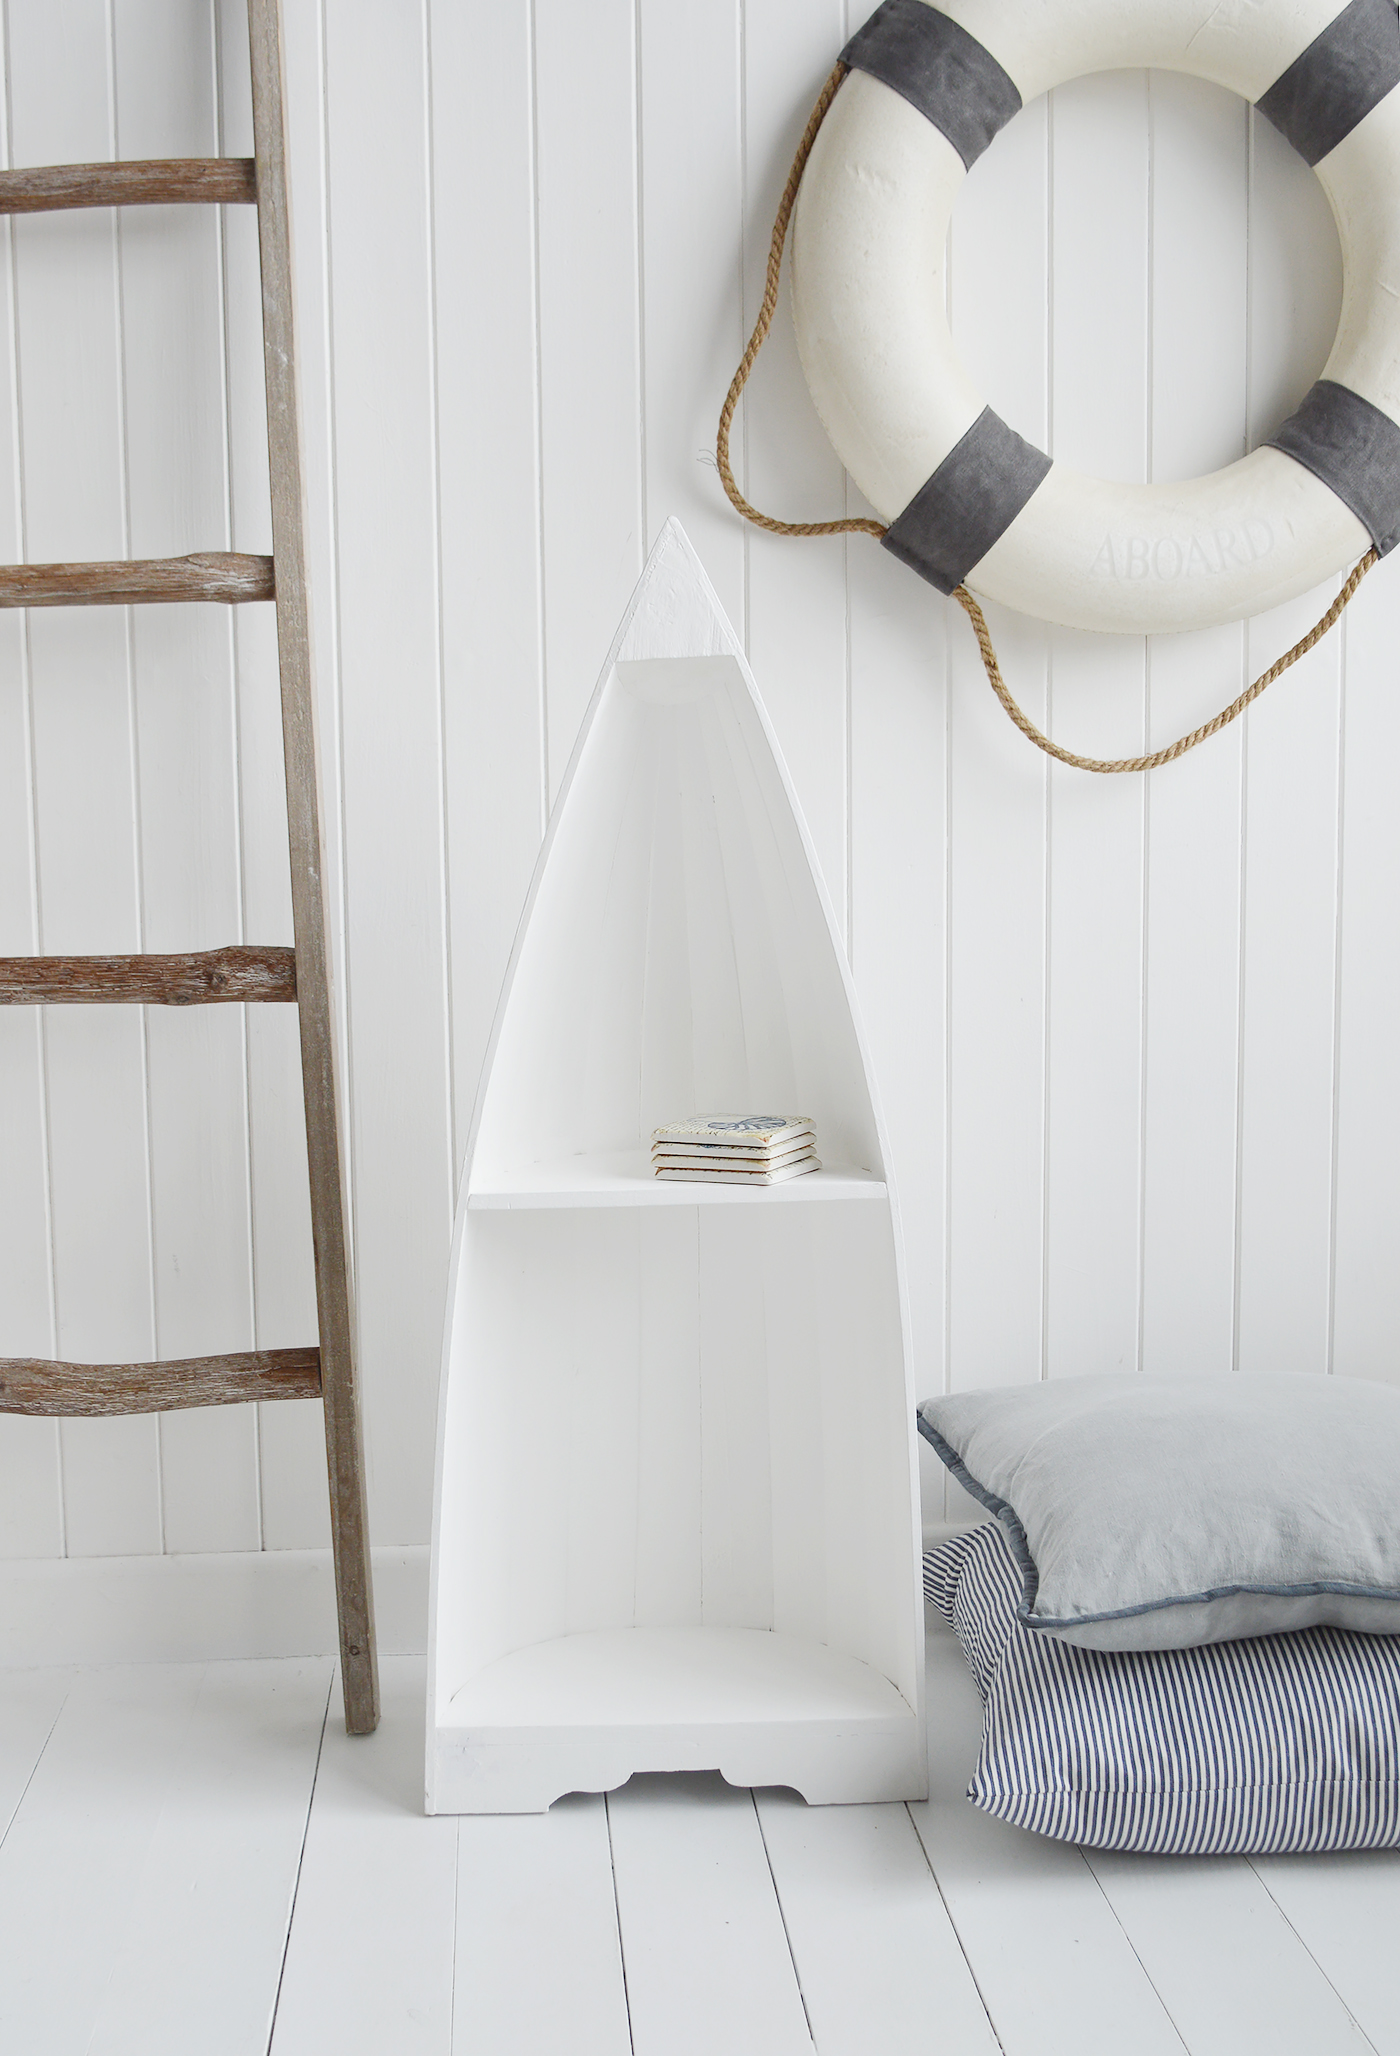 White Wooden Boat Shelf Unit - New England Coastal furniture andf Interiors from The White Lighthouse